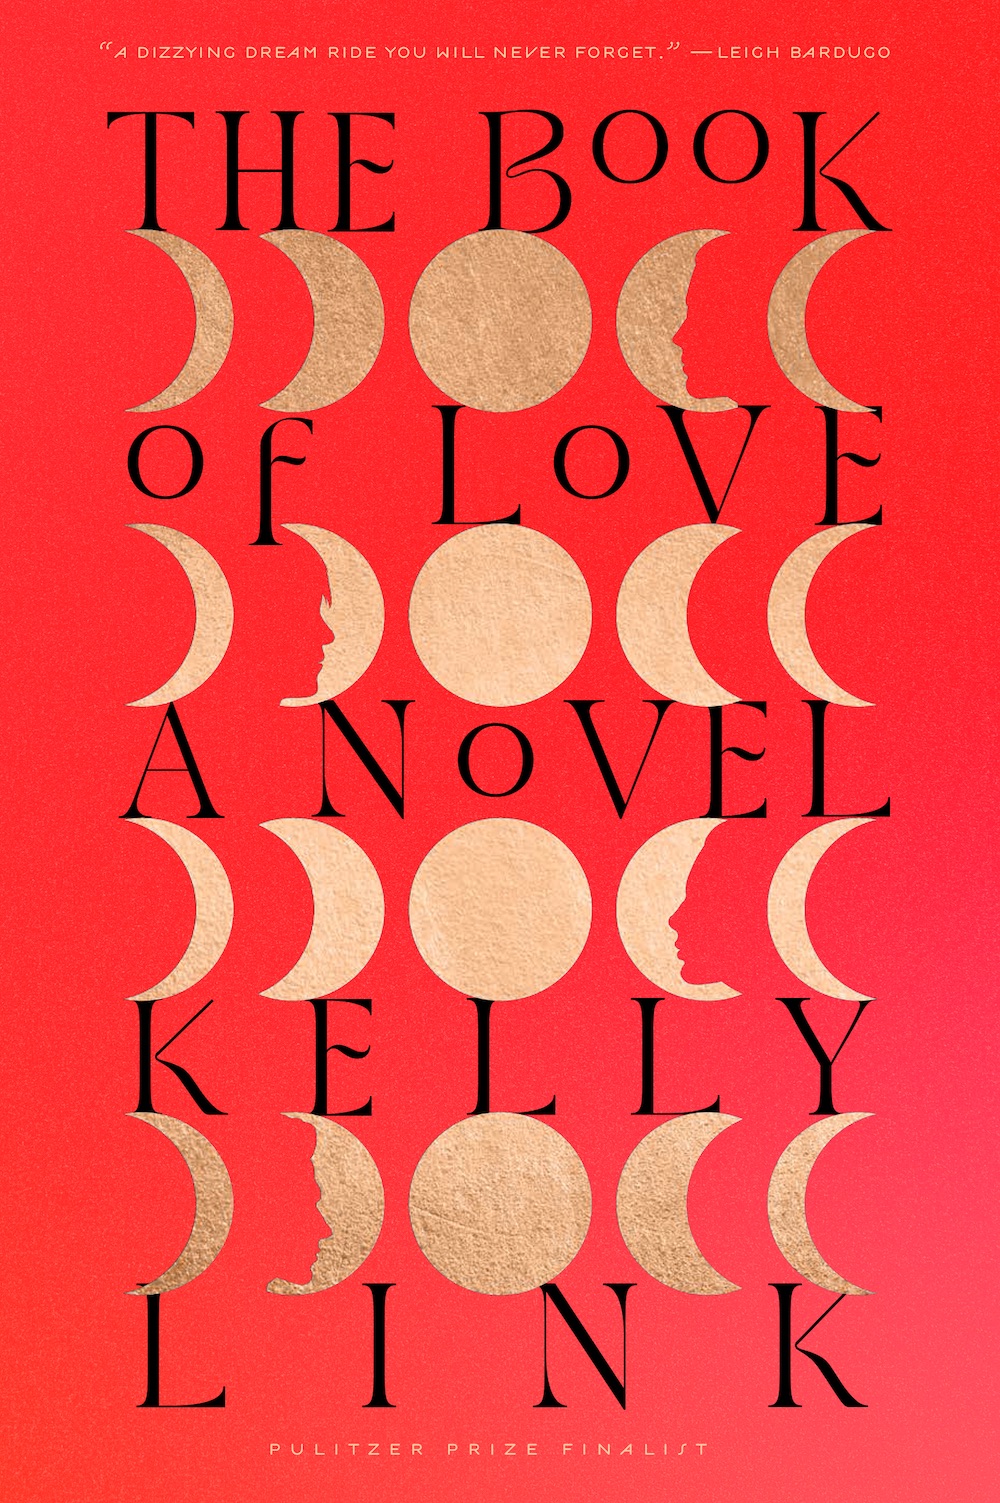 Cover art forThe Book of Love